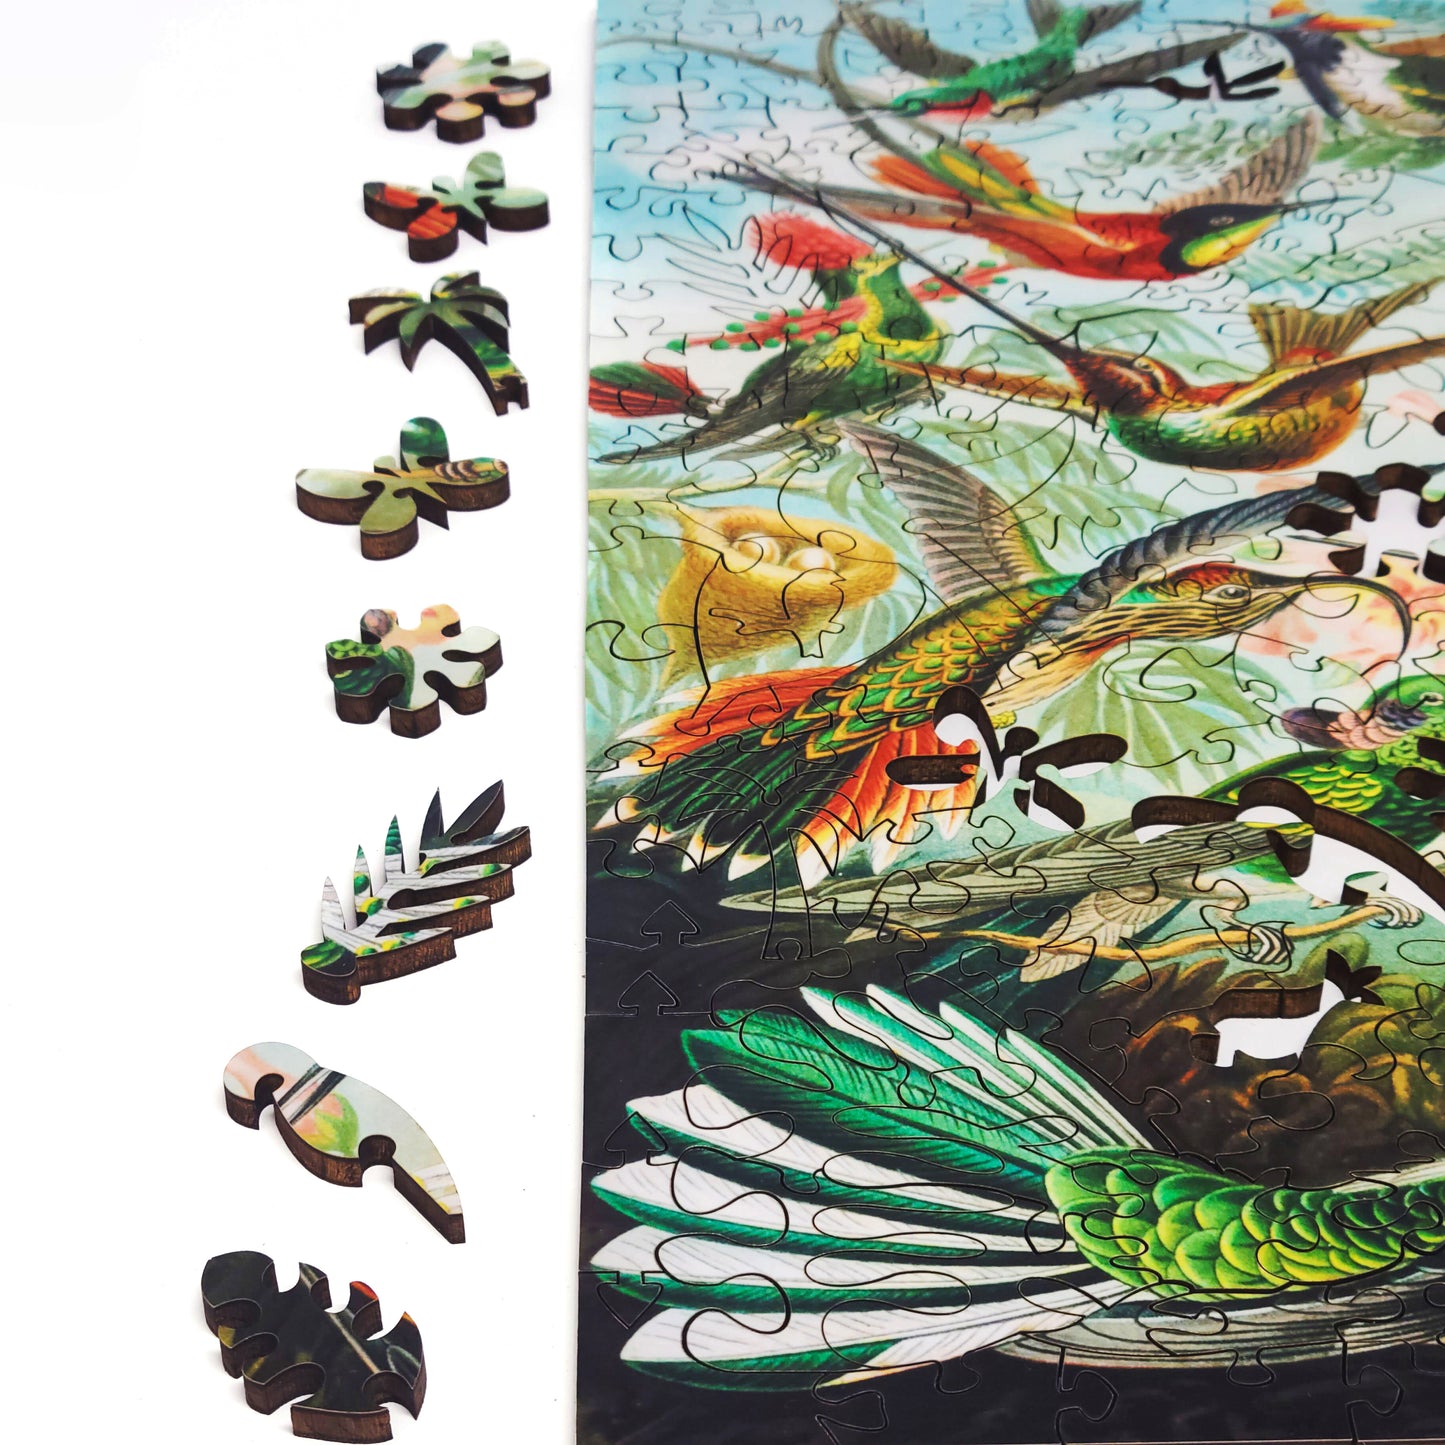 Wooden Jigsaw Puzzle with Uniquely Shaped Pieces for Adults - 267 Pieces - Hummingbirds